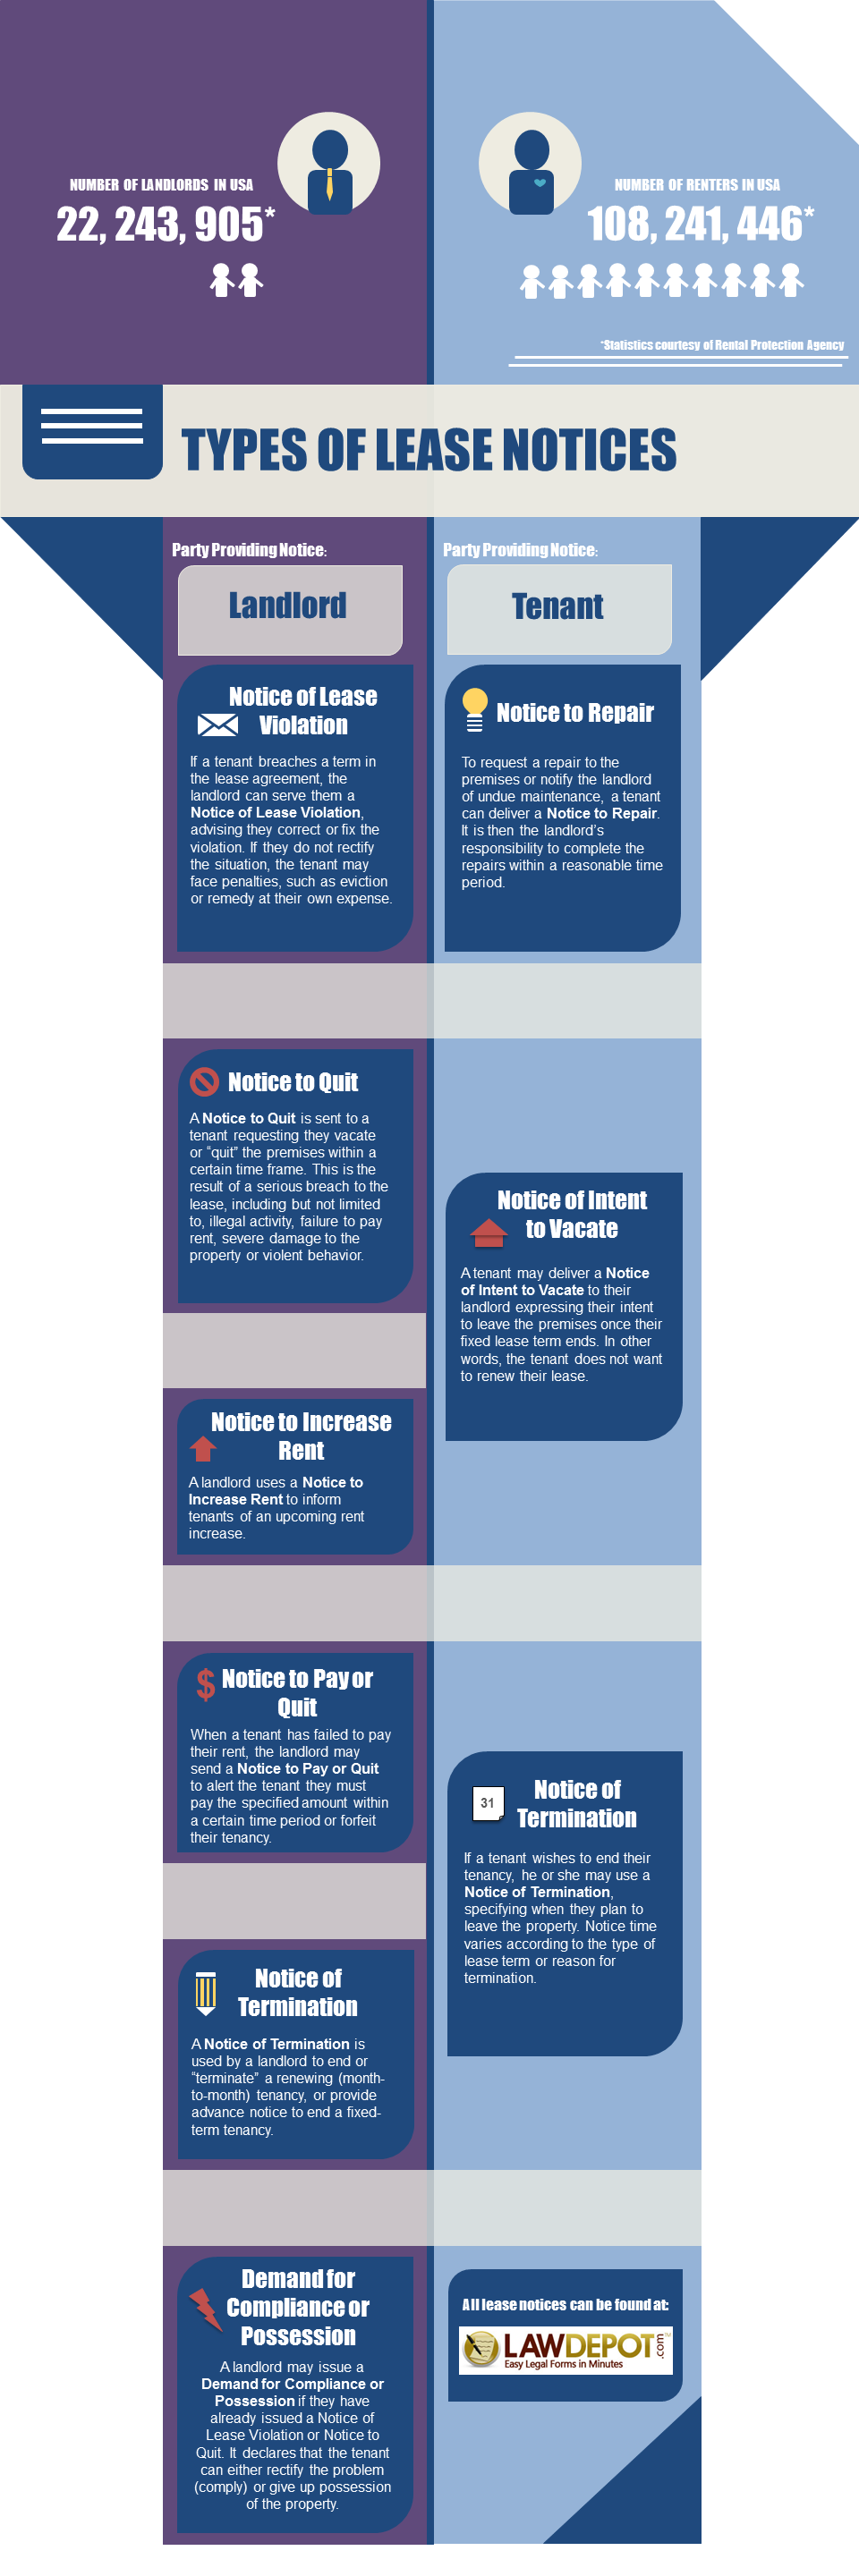 Types of Lease Notices [Infographic]